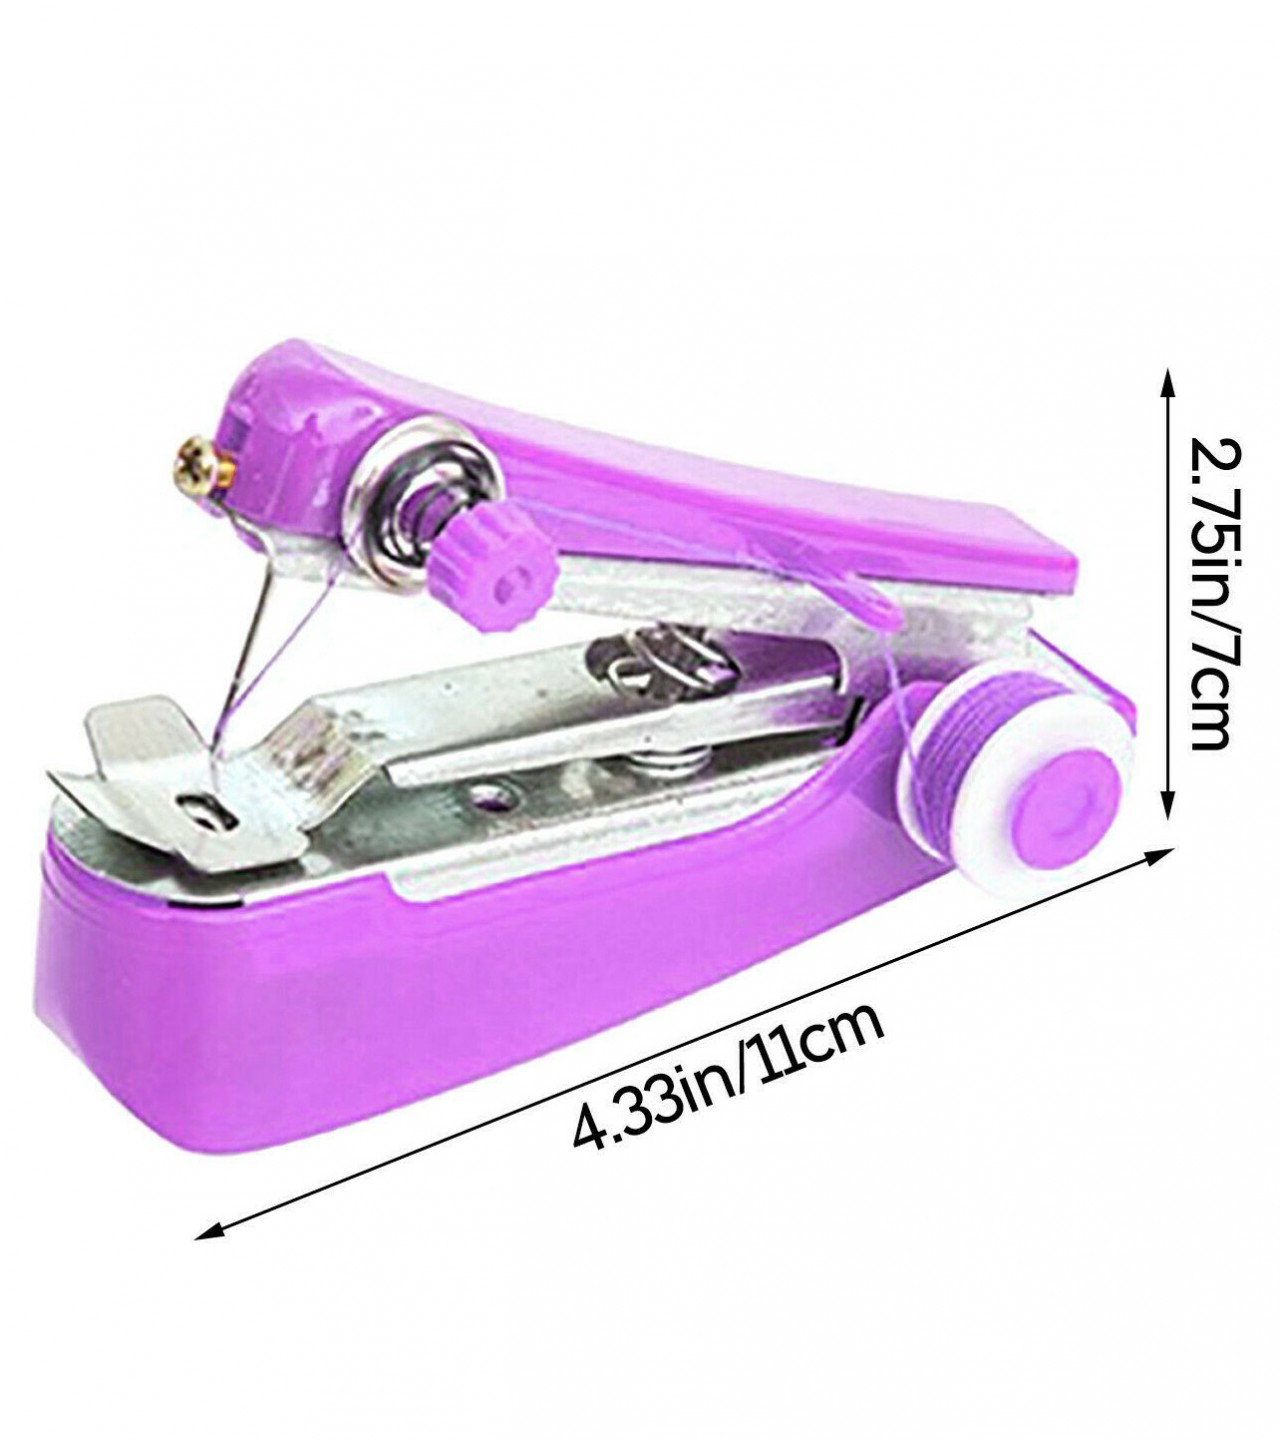 Portable Mini Household Stitch Clothes Fabric Sewing Tool For Use Home Travel - Multi